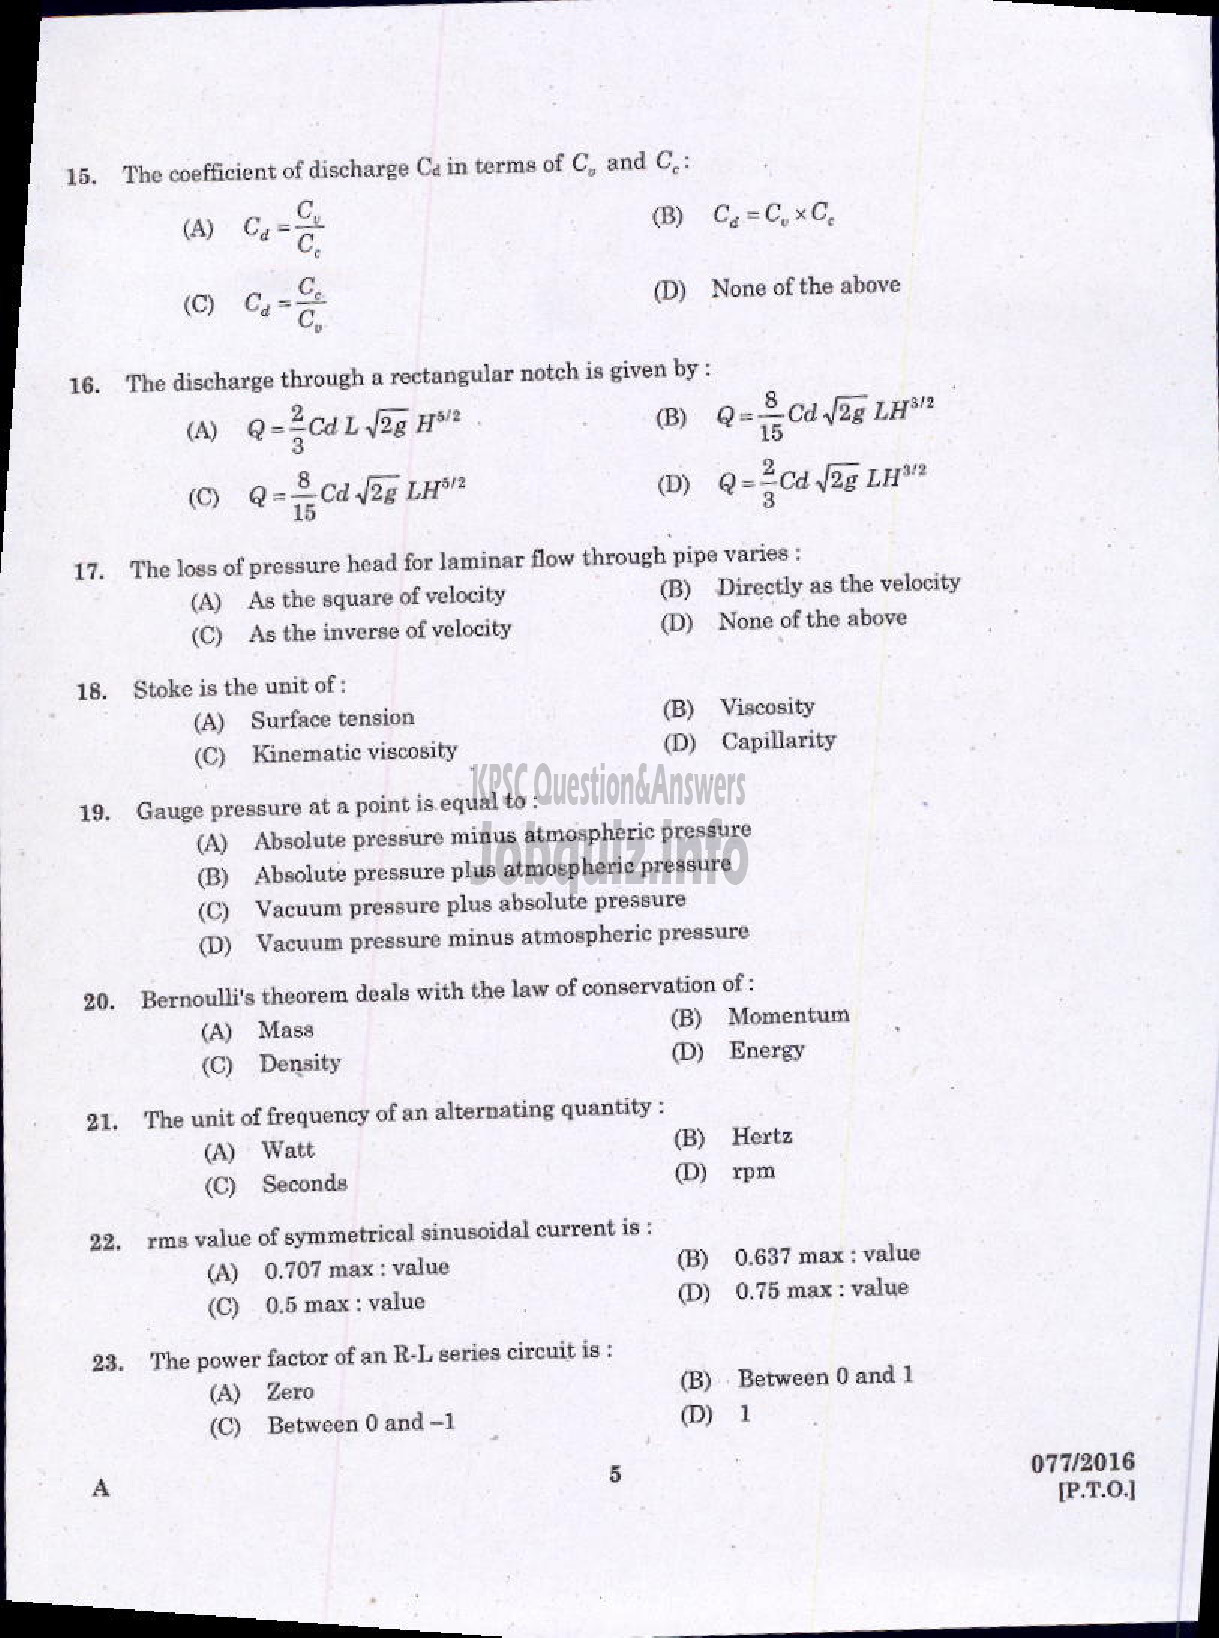 Kerala PSC Question Paper - VOCATIONAL INSTRUCTOR IN MECHANICAL SERVICING AGRO MACHINERY VHSE-3